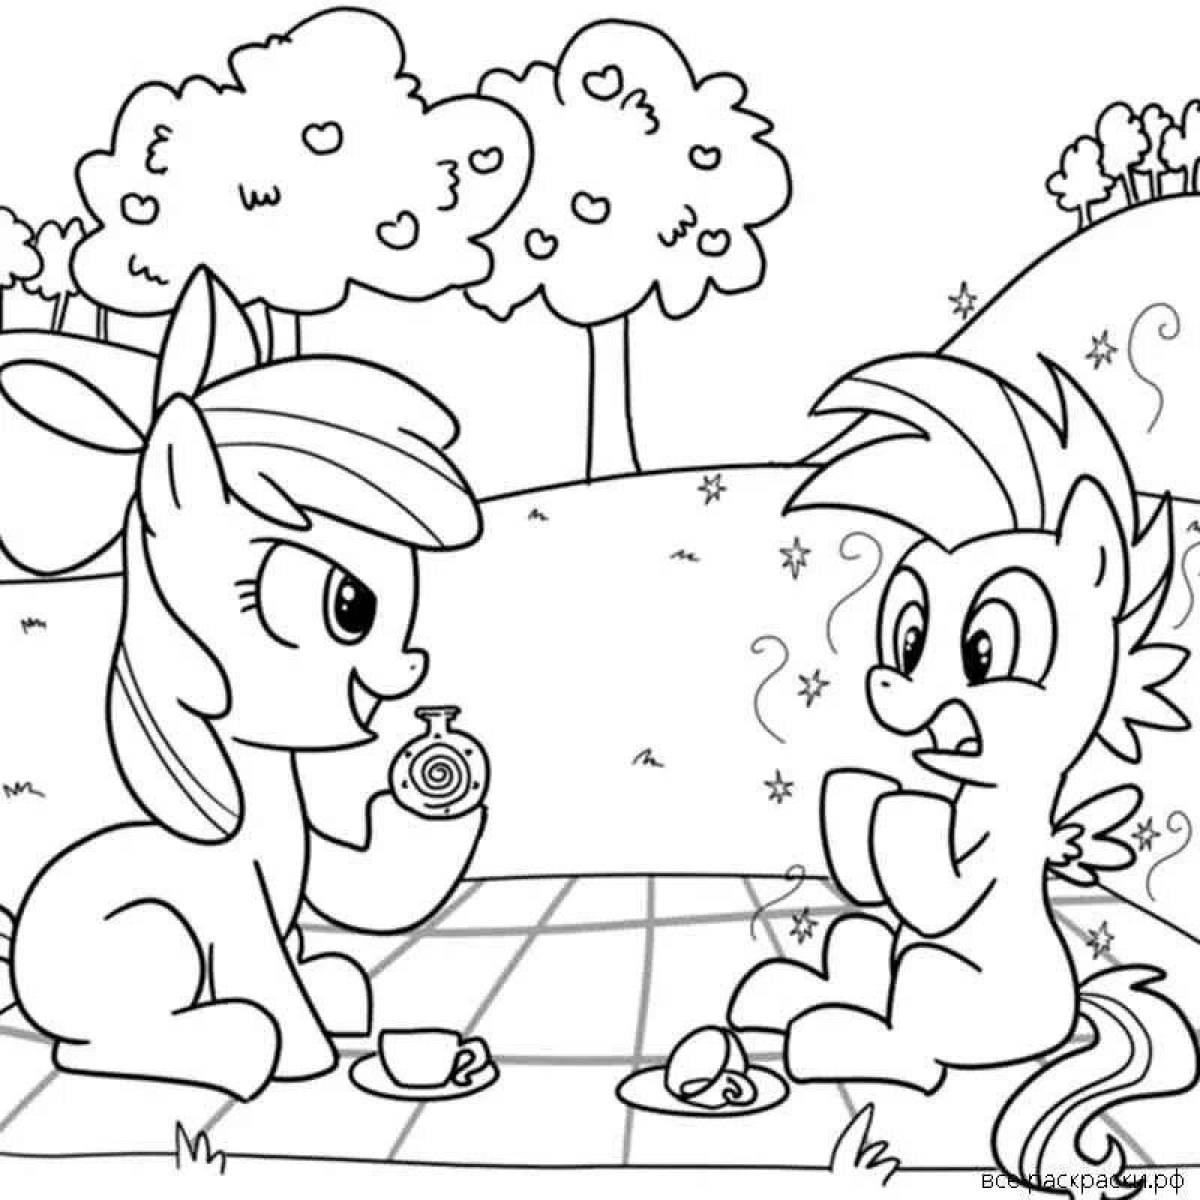 Adorable pony play time coloring page